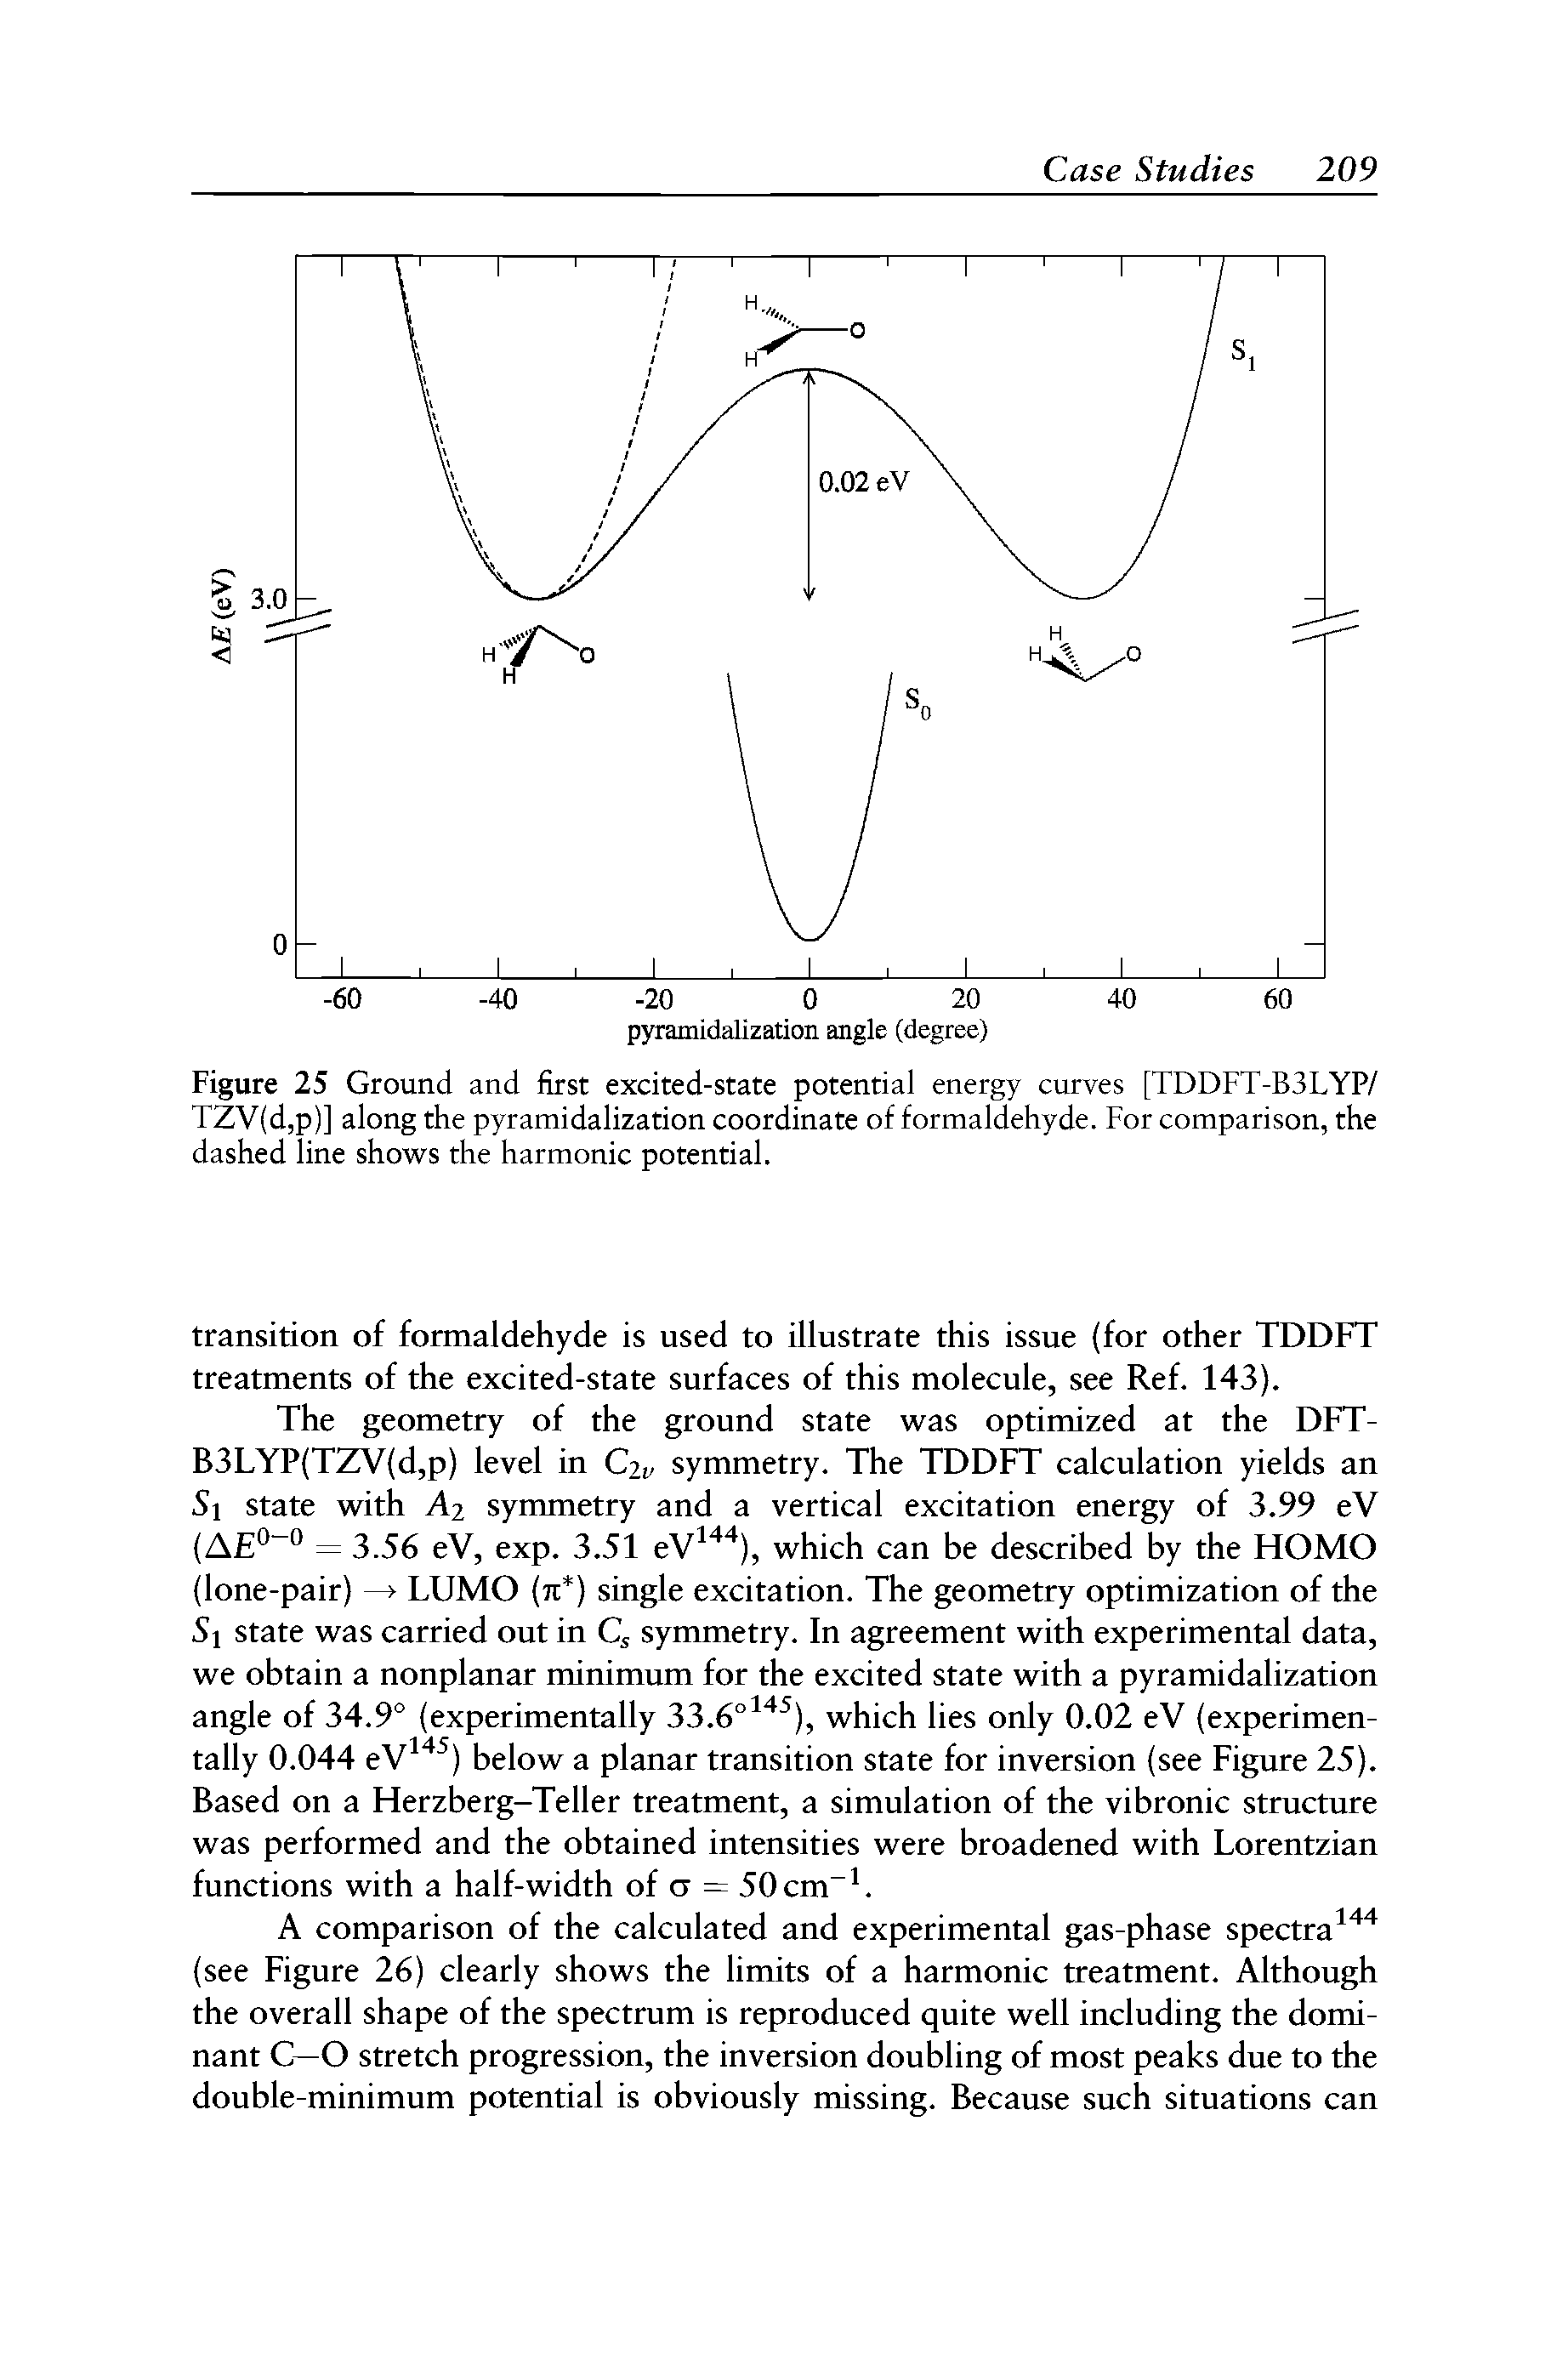 Figure 25 Ground and first excited-state potential energy curves [TDDFT-B3LYP/ TZV(d,p)] along the pyramidalization coordinate of formaldehyde. For comparison, the dashed line shows the harmonic potential.